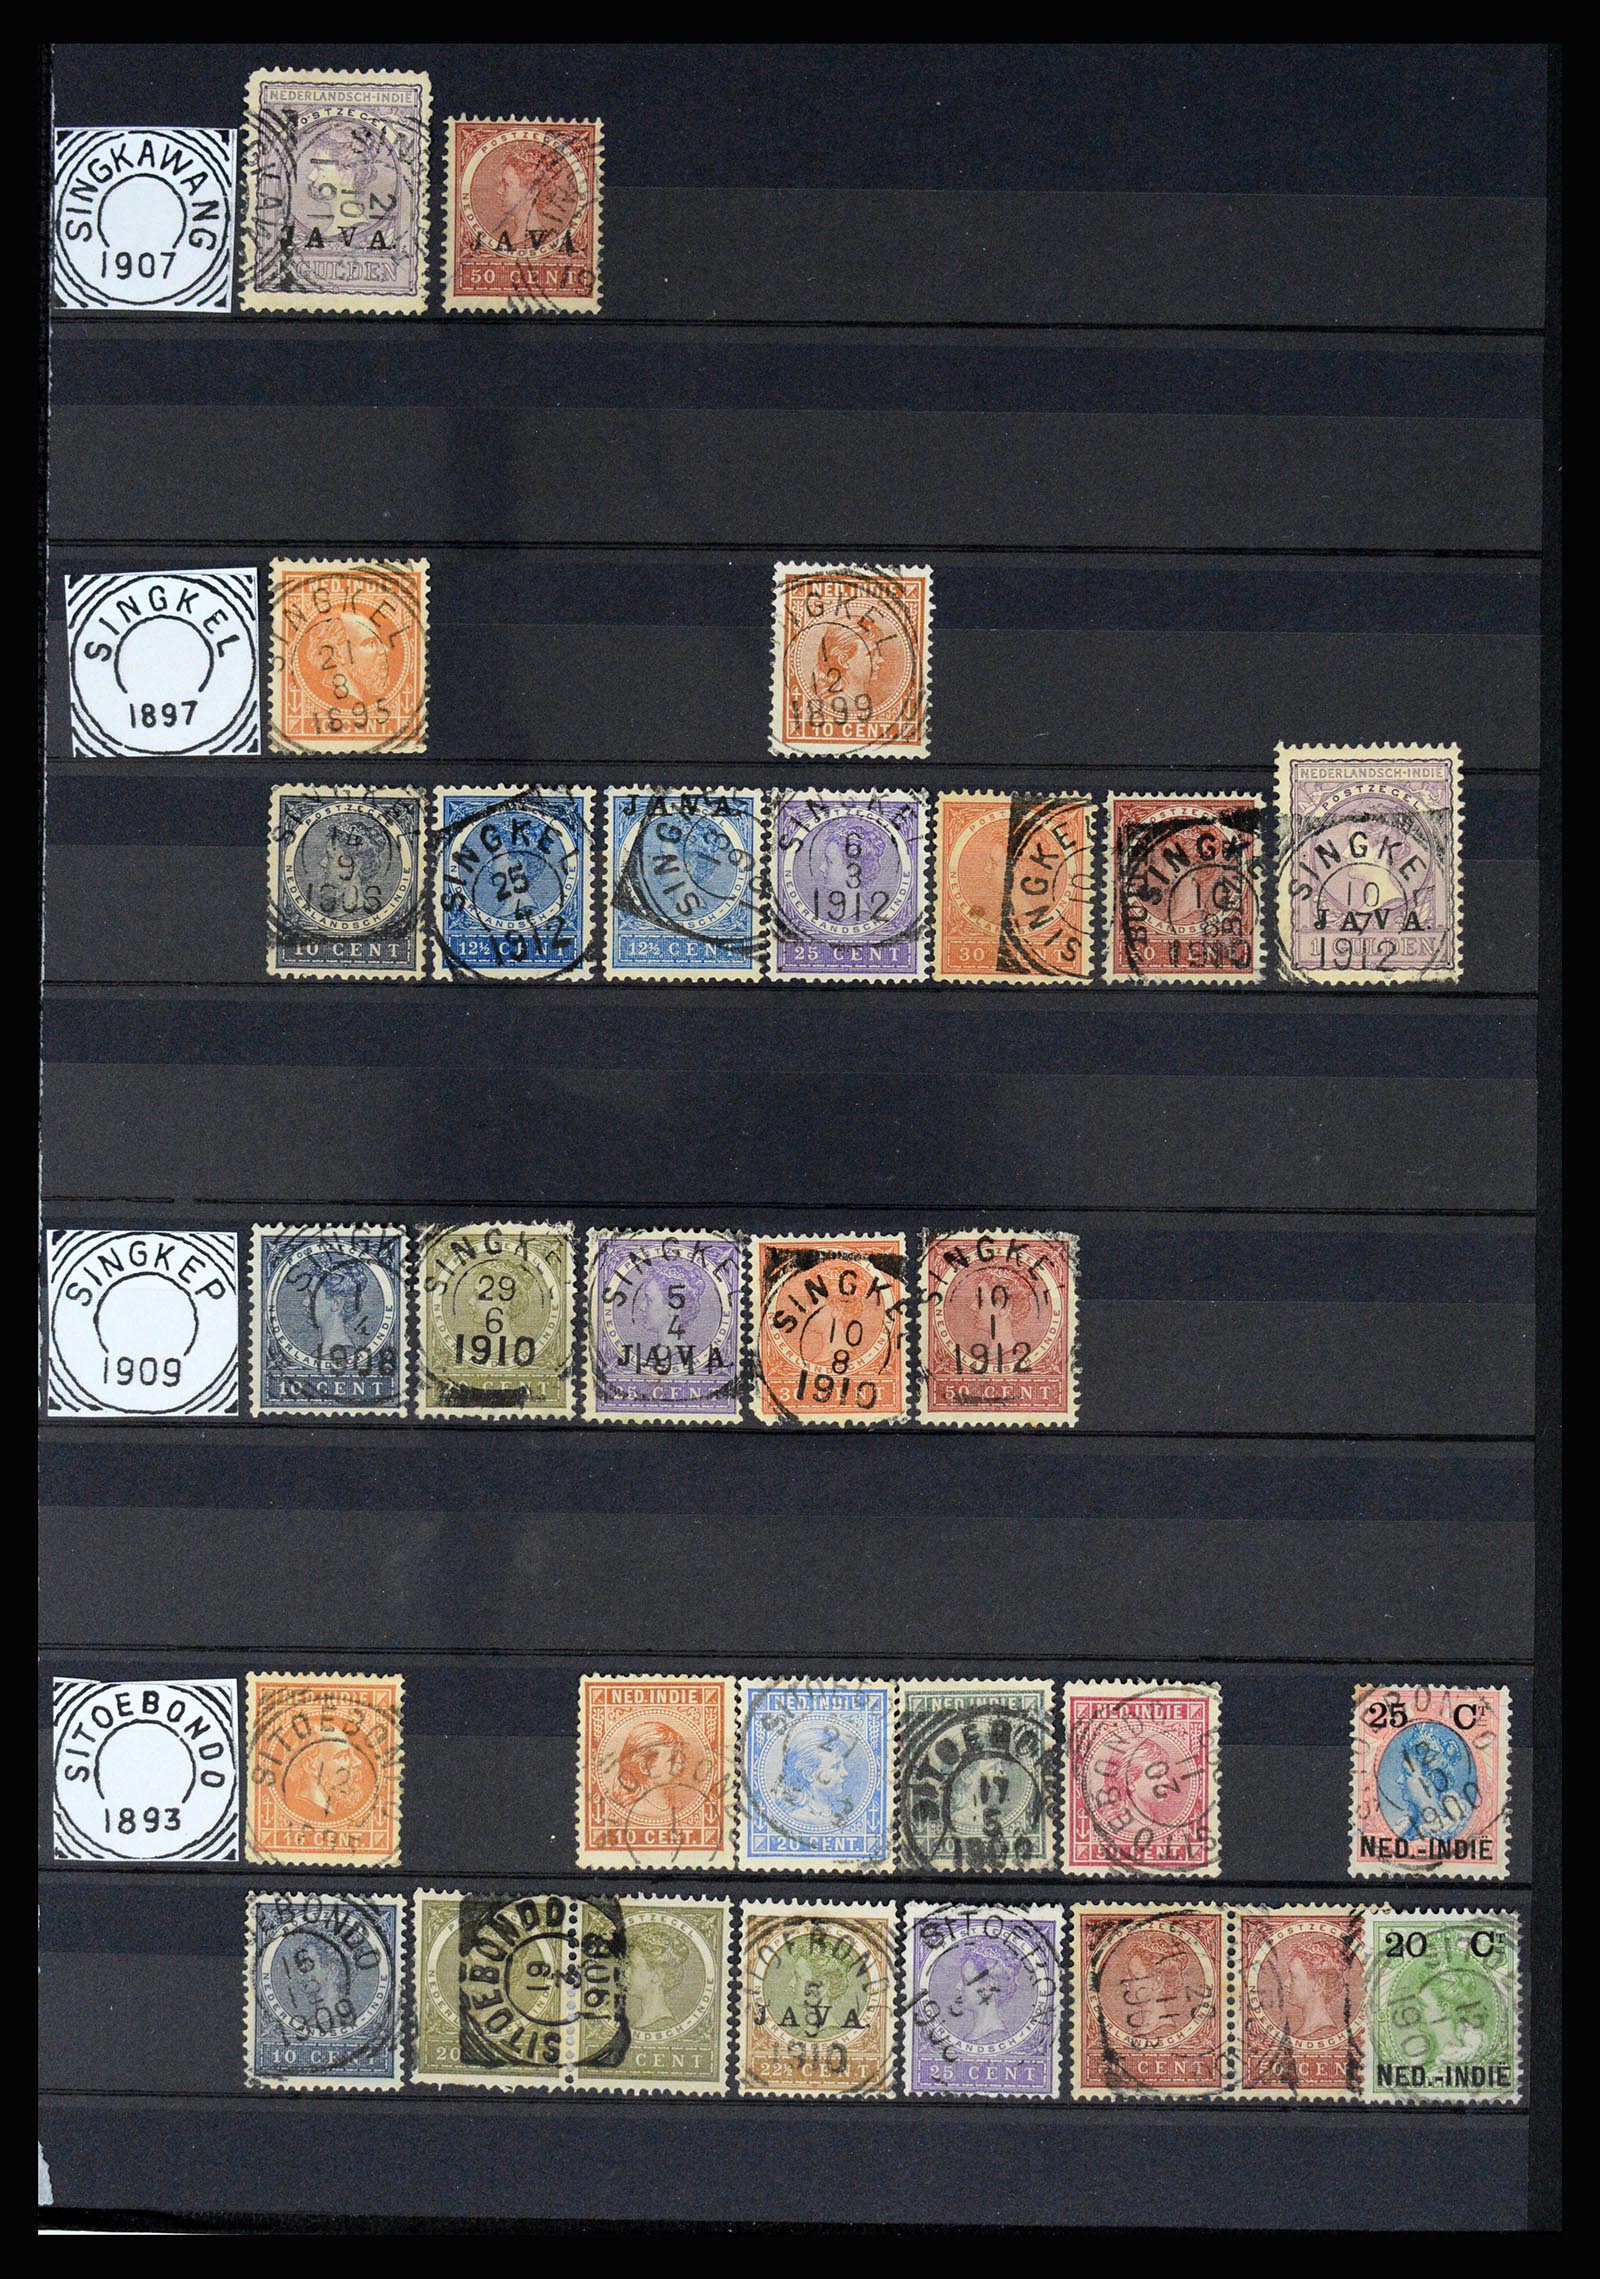 36839 048 - Stamp collection 36839 Dutch east Indies square cancels.